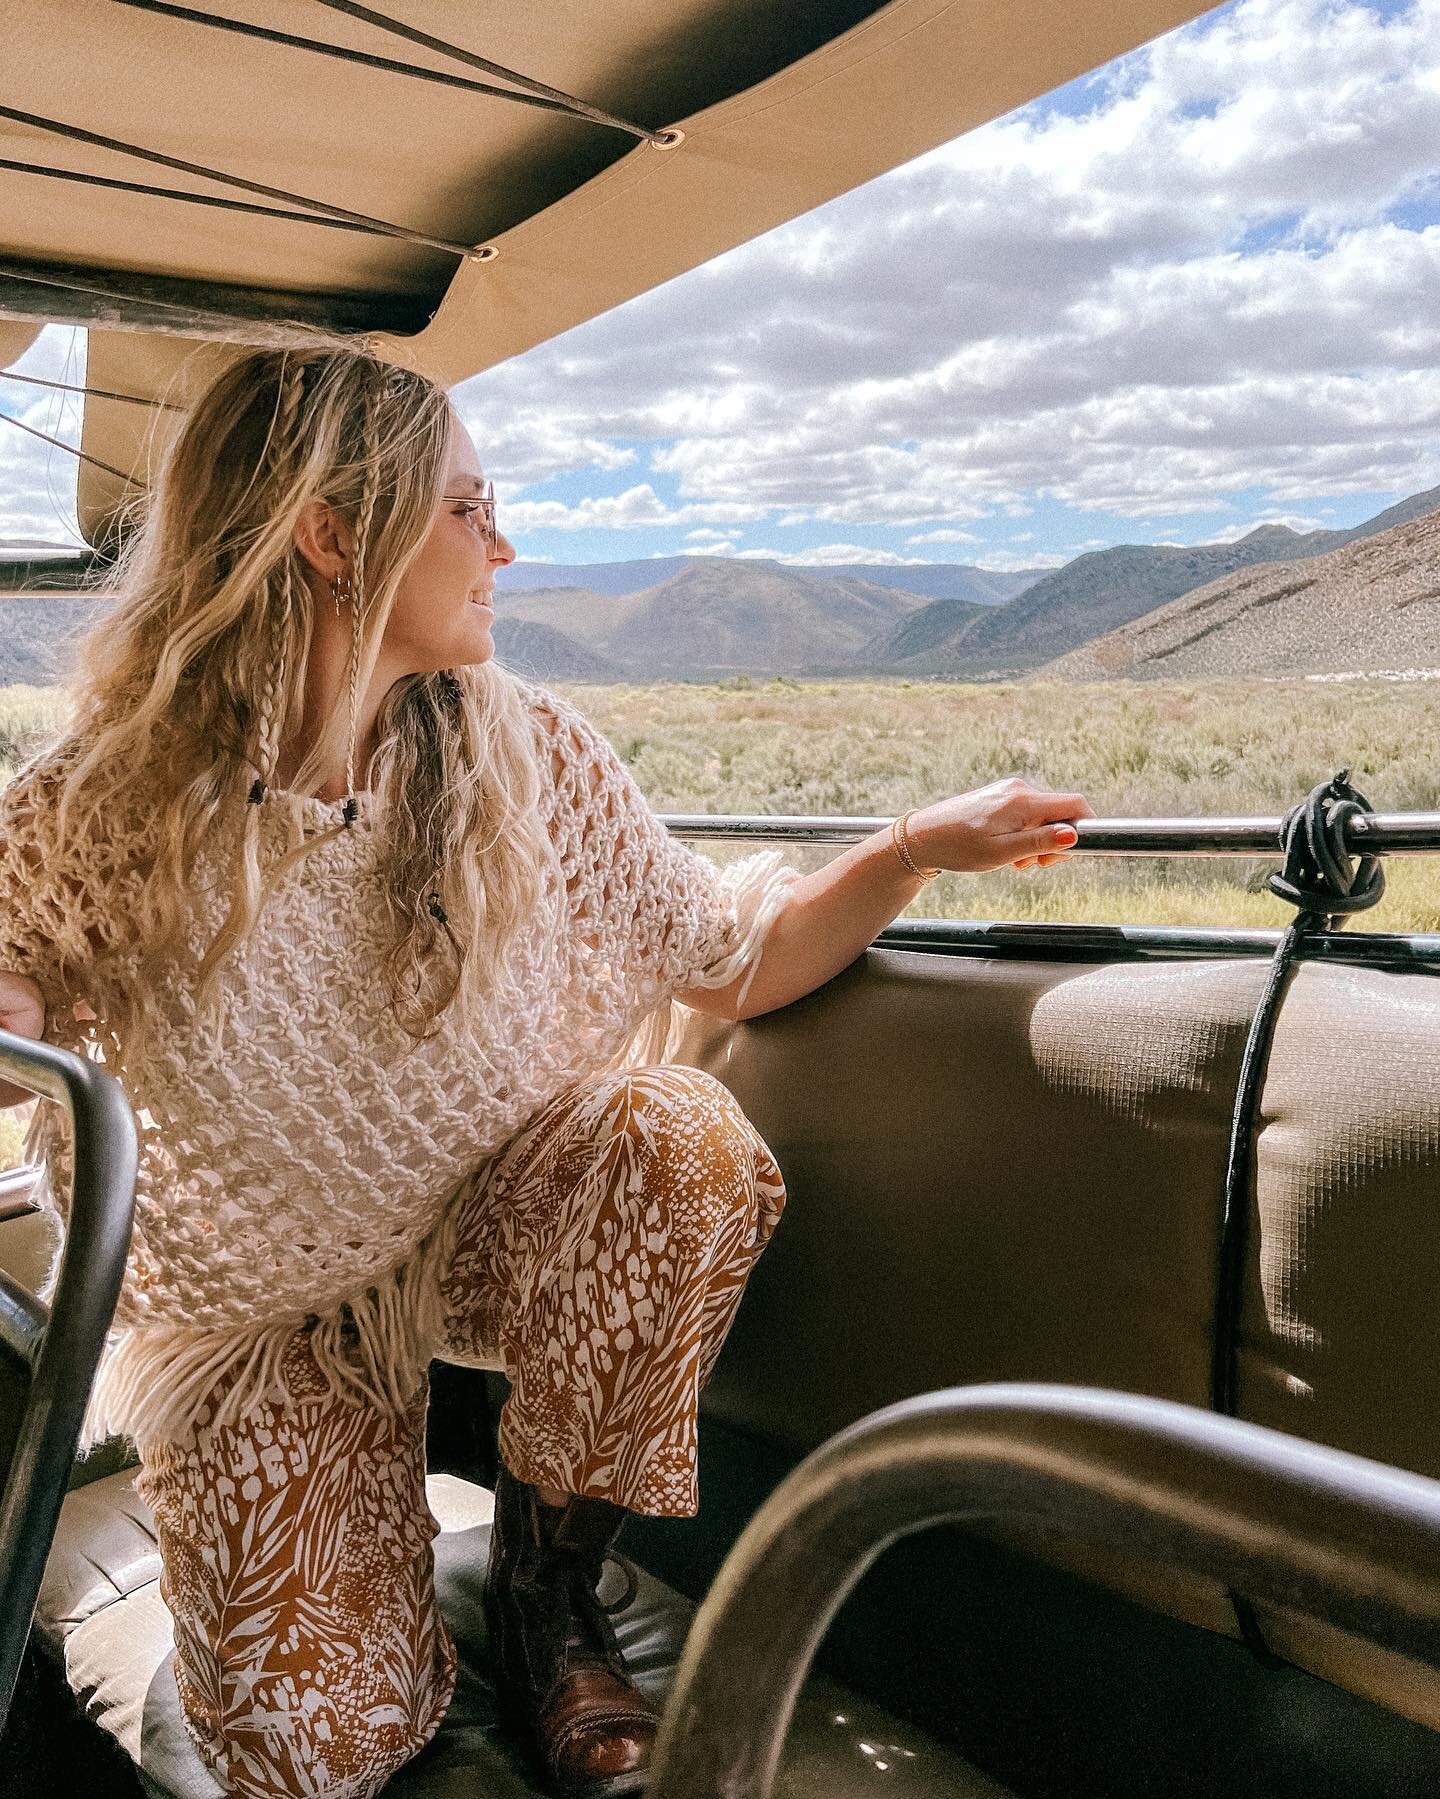 From the majestic lions to the vibrant culture, my recent trip to South Africa inspired me to curate a new collection that captures the spirit of the safari!🦁
I've scoured the markets in South Africa filled with treasures created by local artisans t